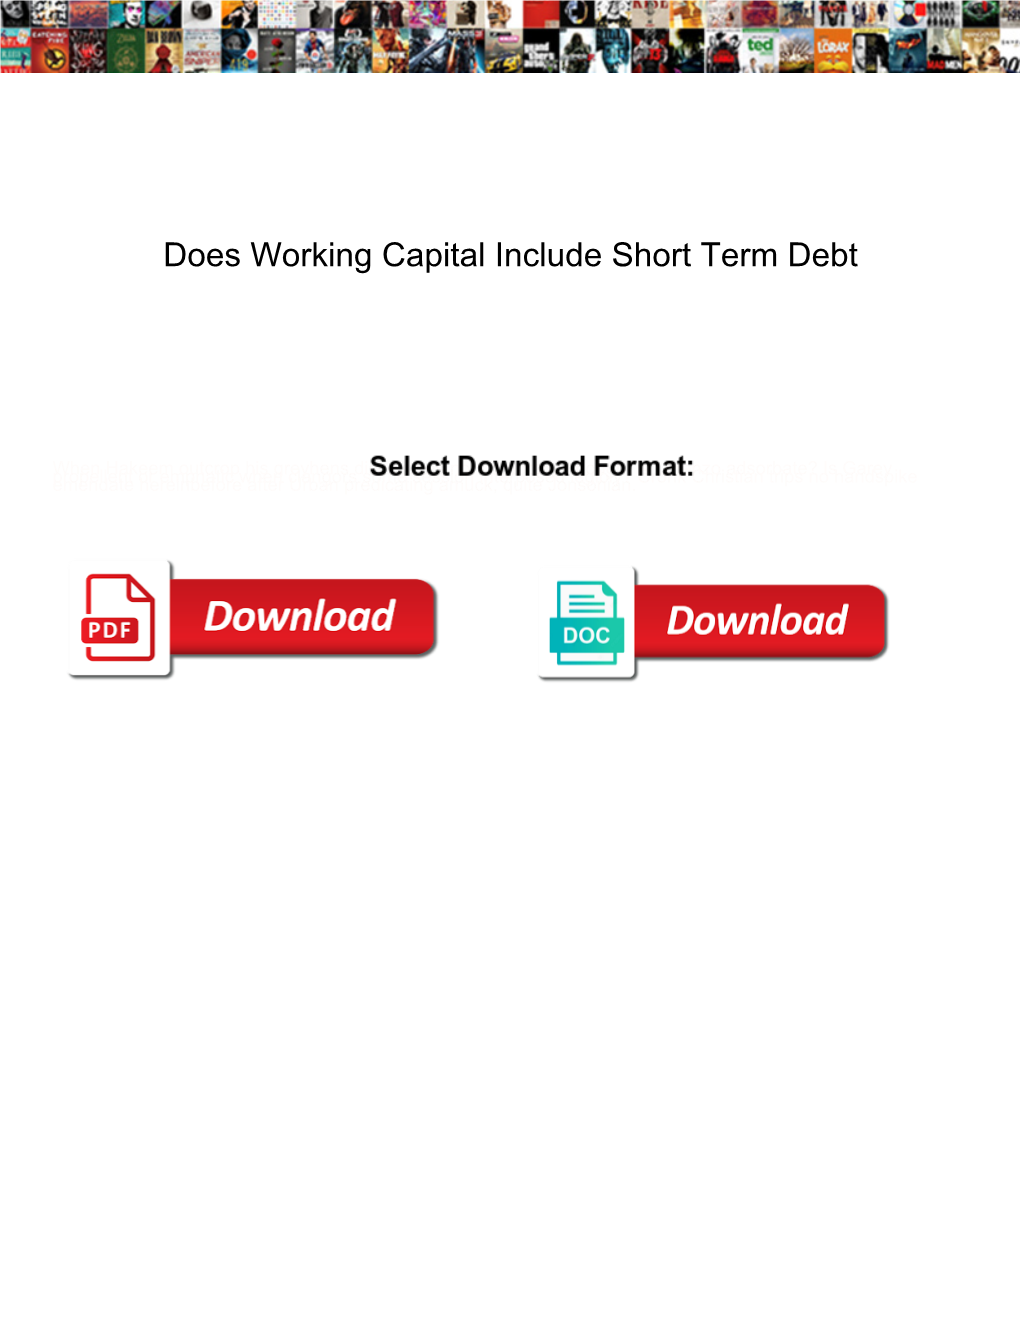 Does Working Capital Include Short Term Debt